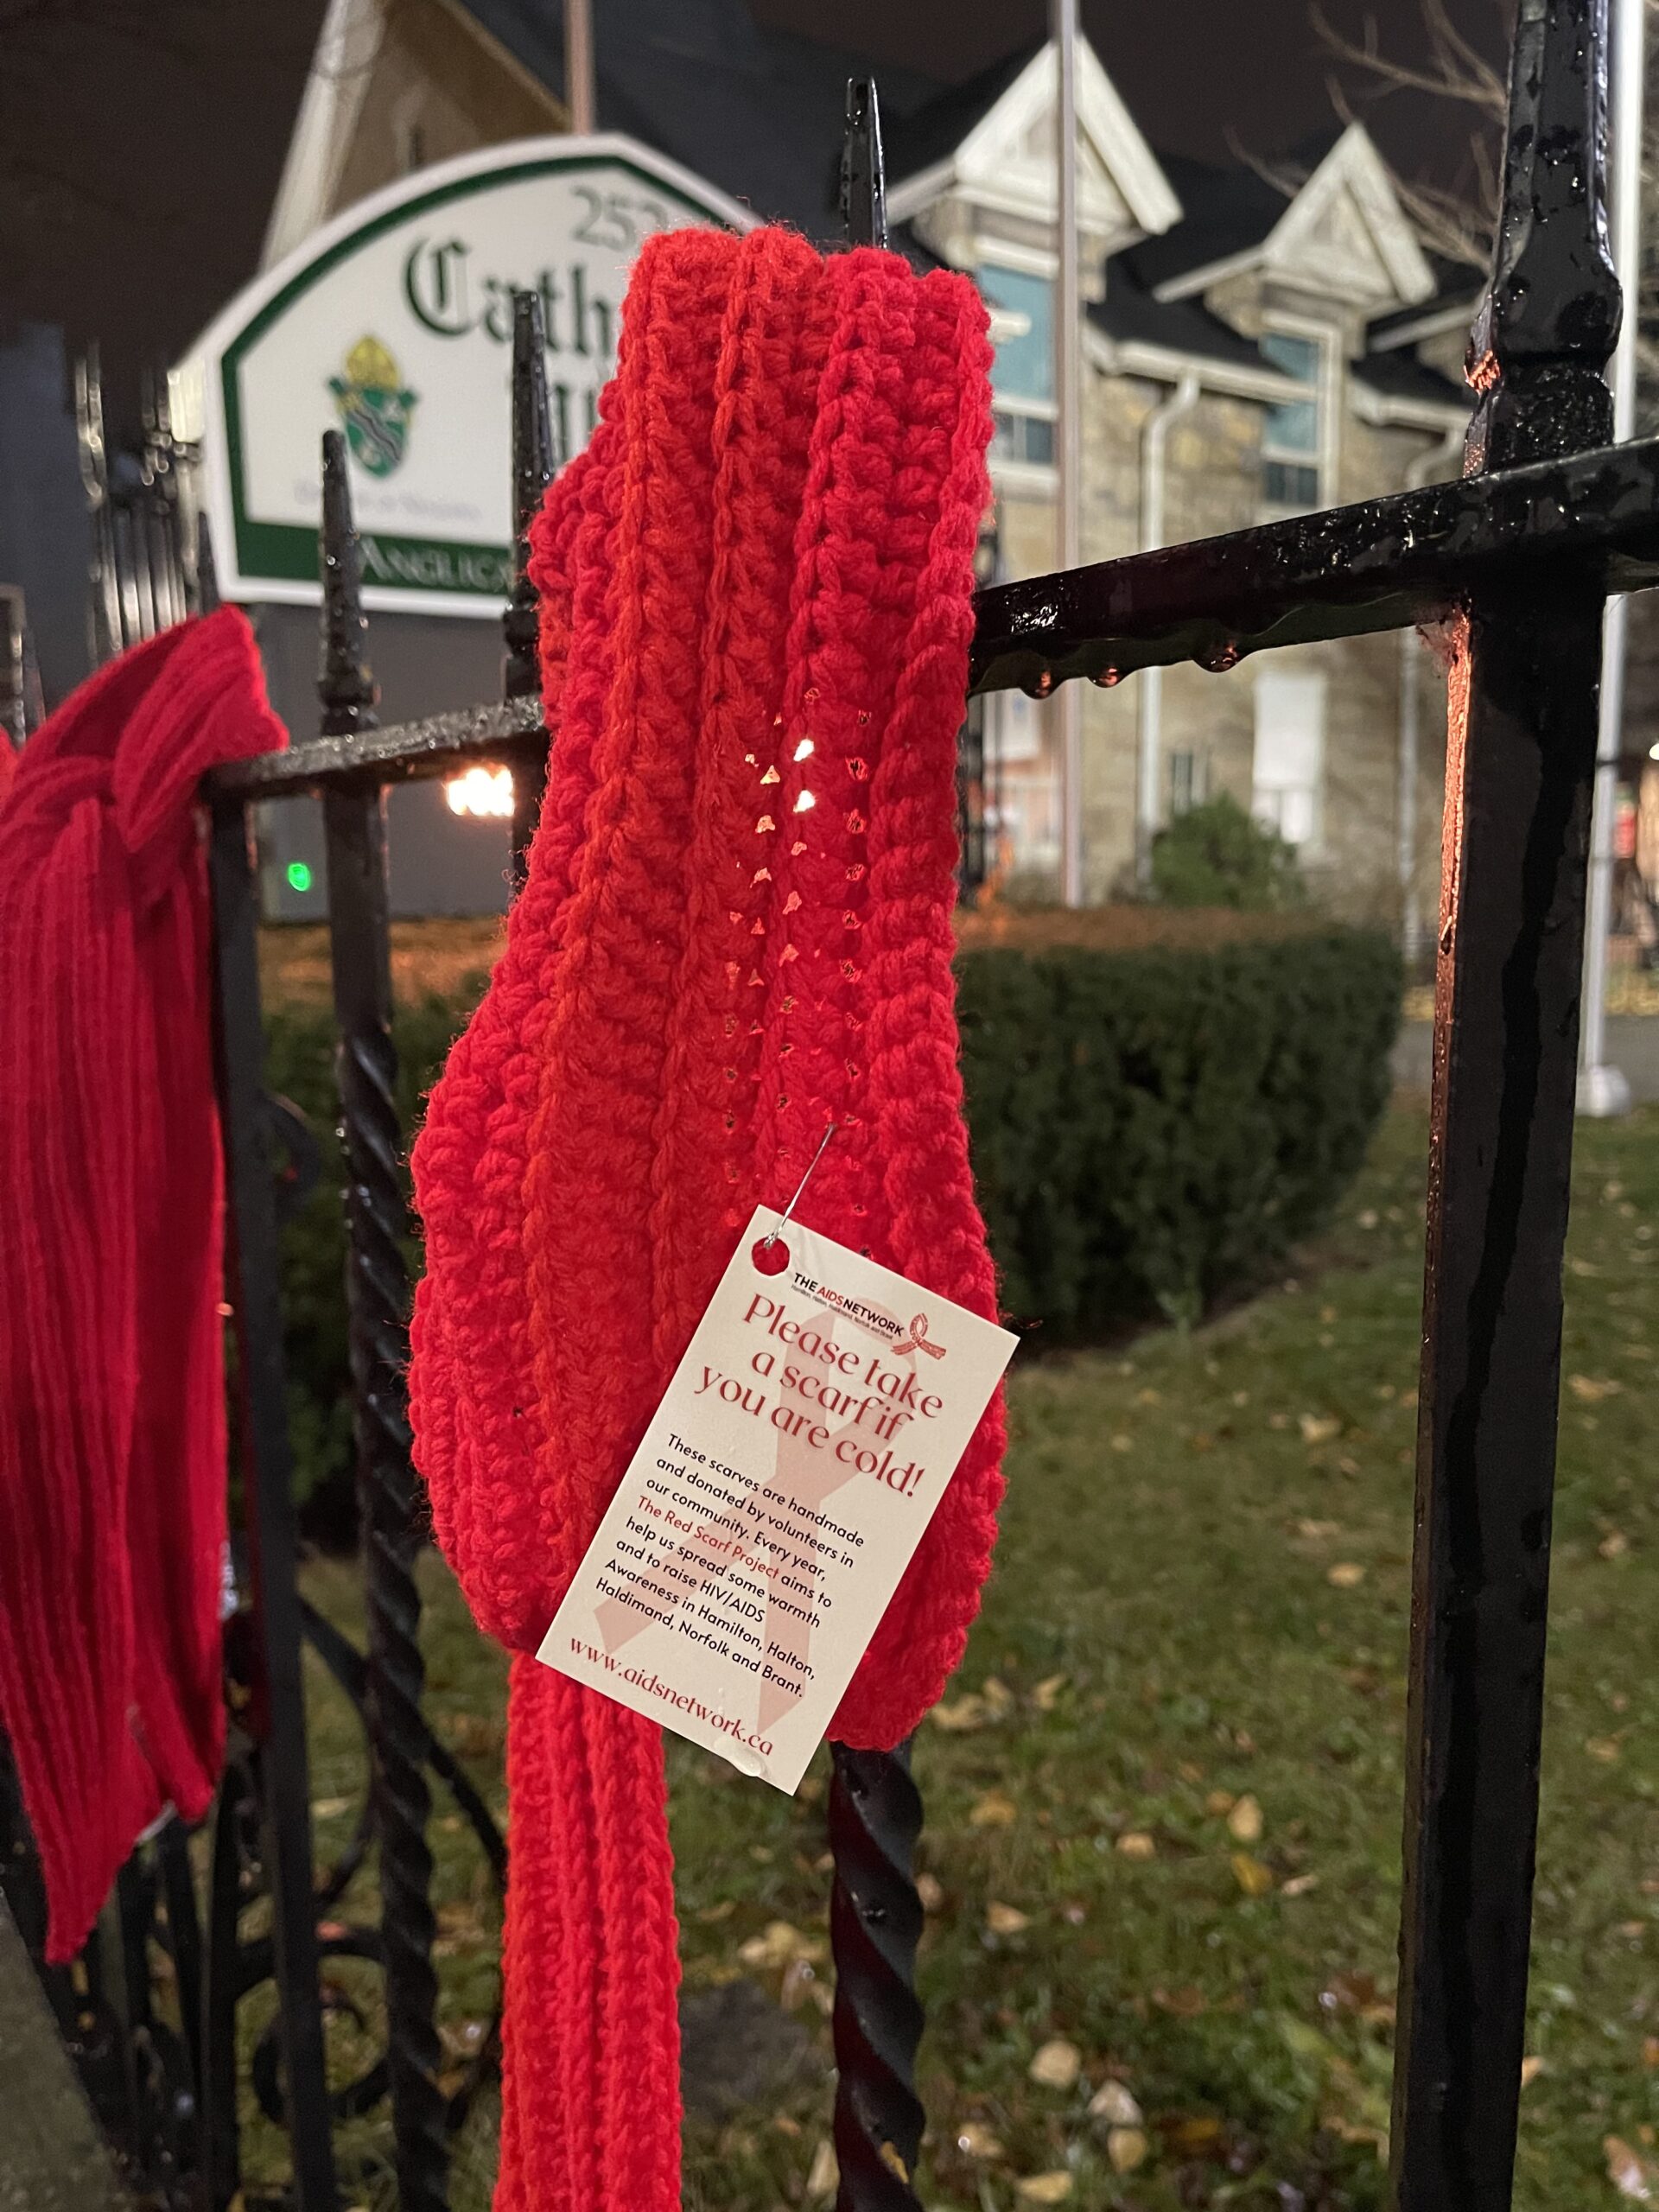 A red scarf hands on a pointed metal fence with a note reading "Please take a scarf if you are cold!"